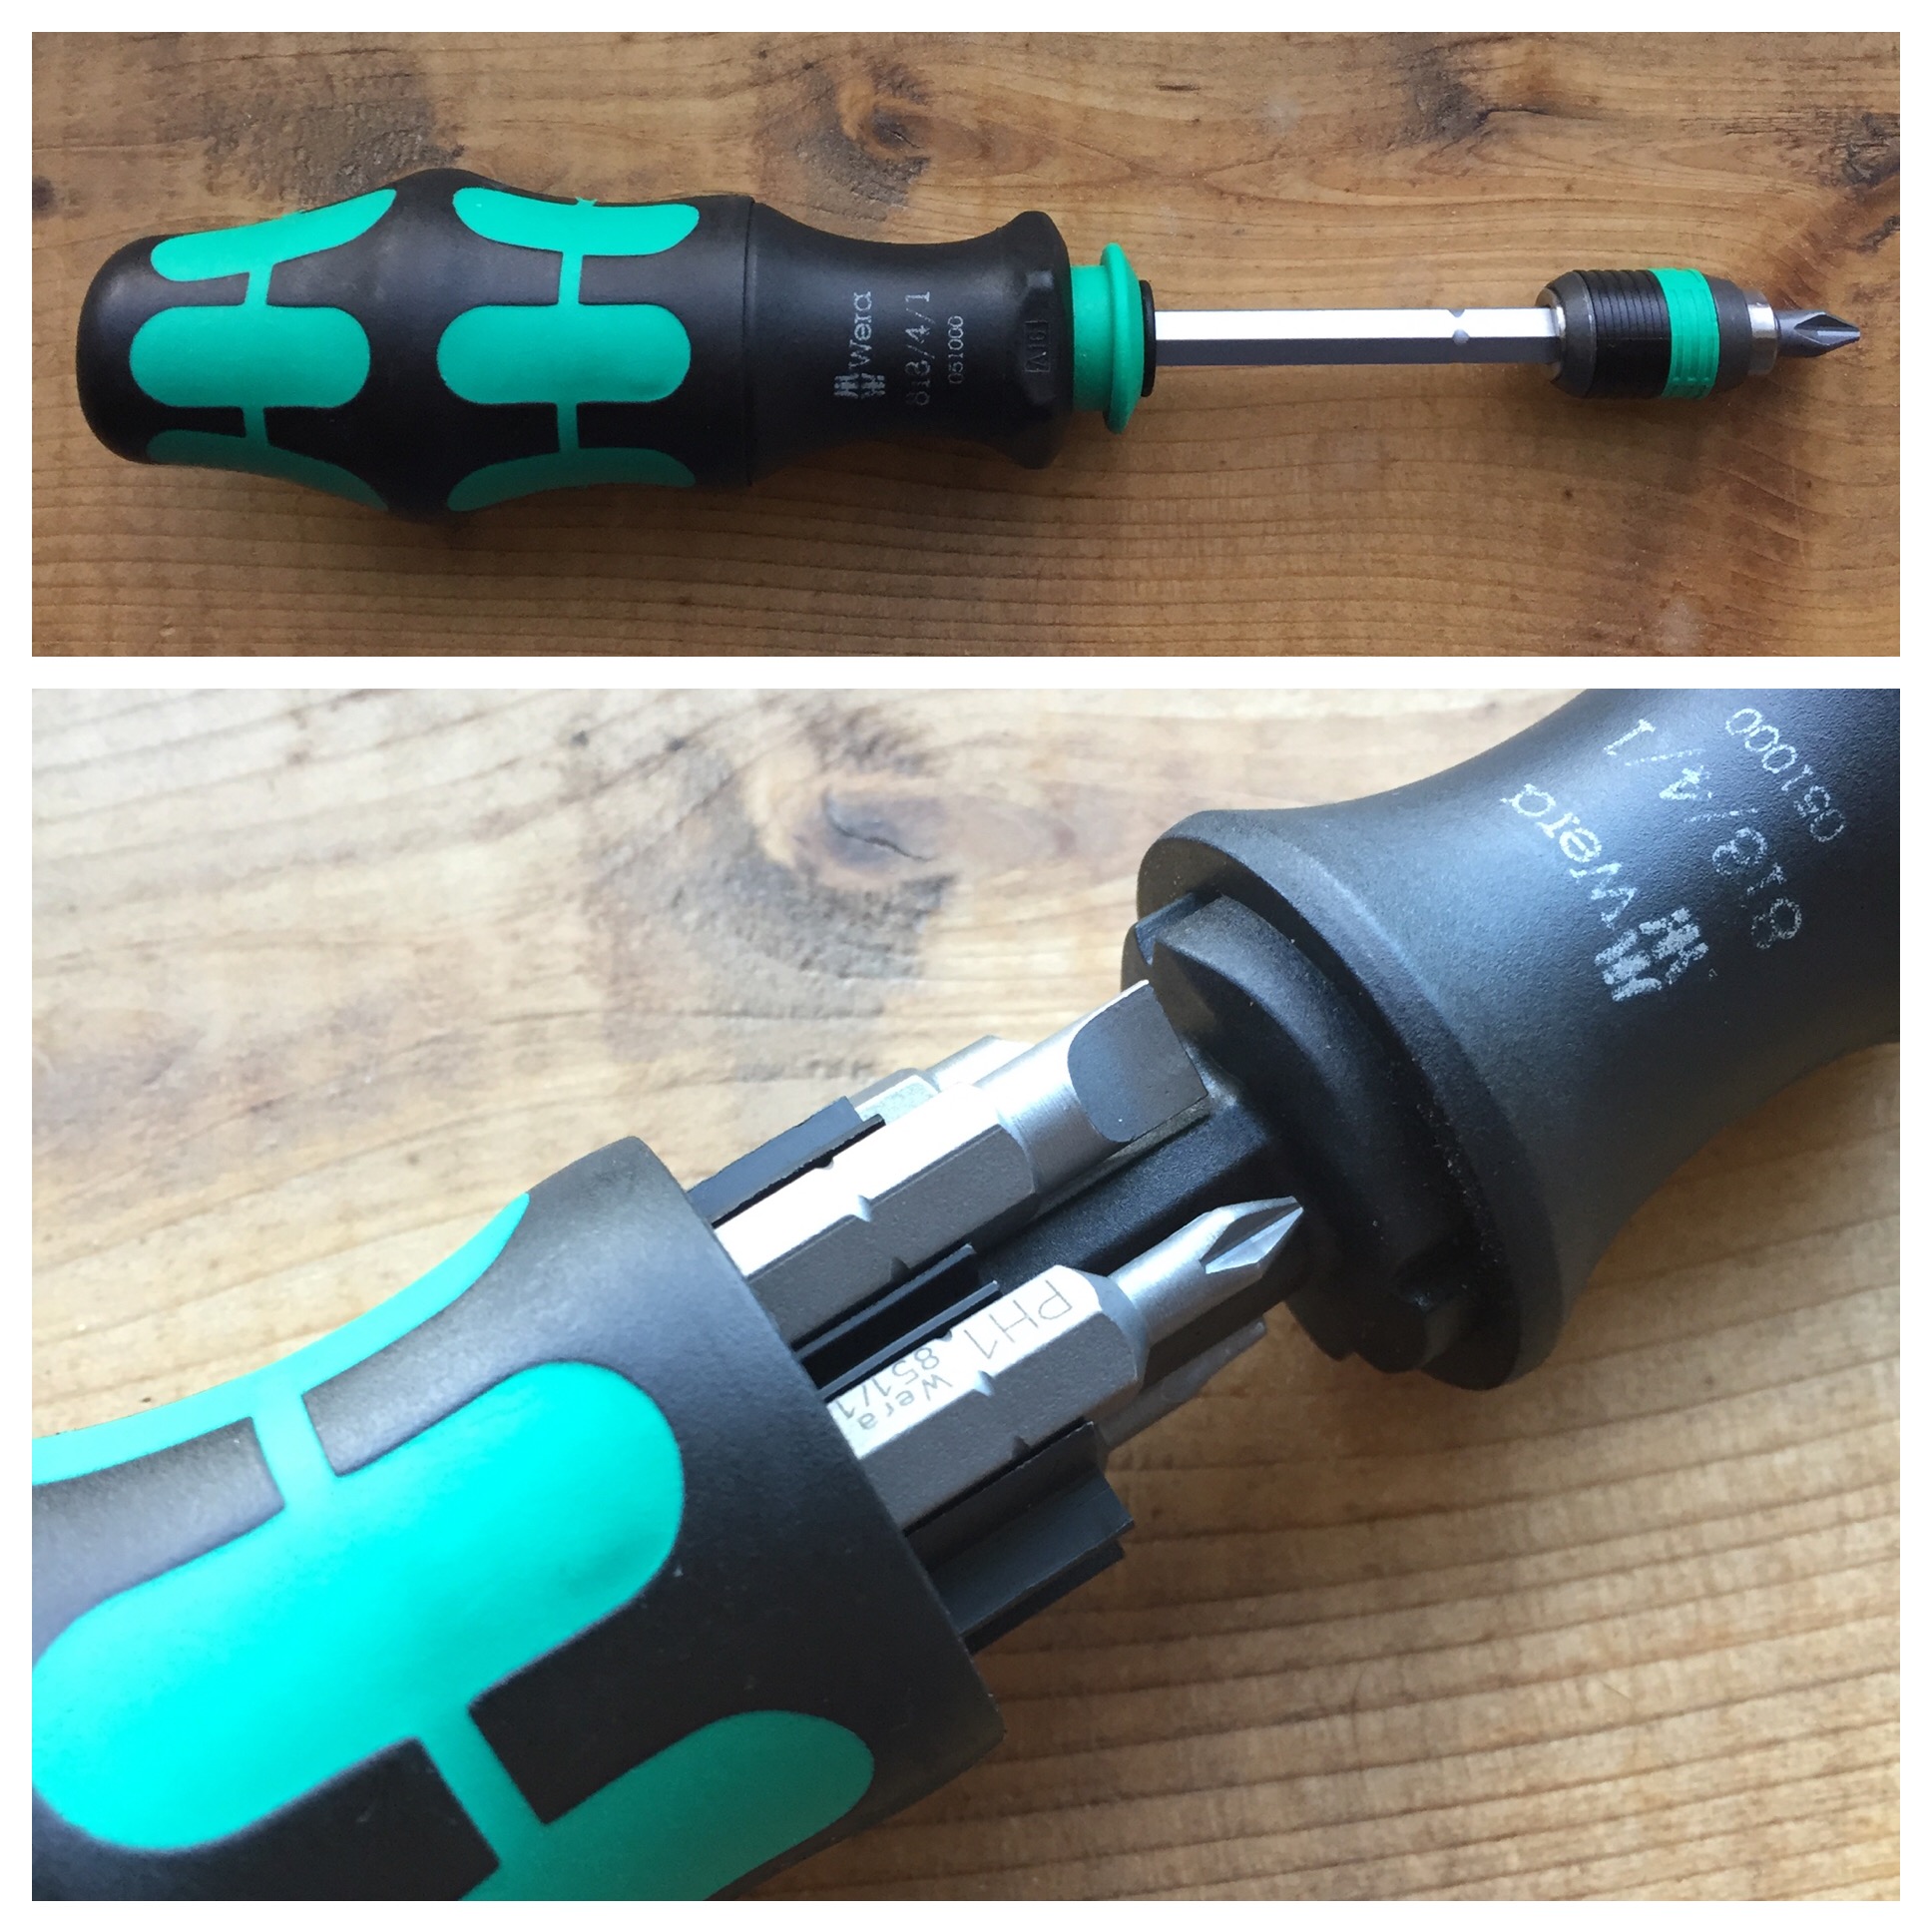 What's your favourite Wera tool and why? Share with us in the comments